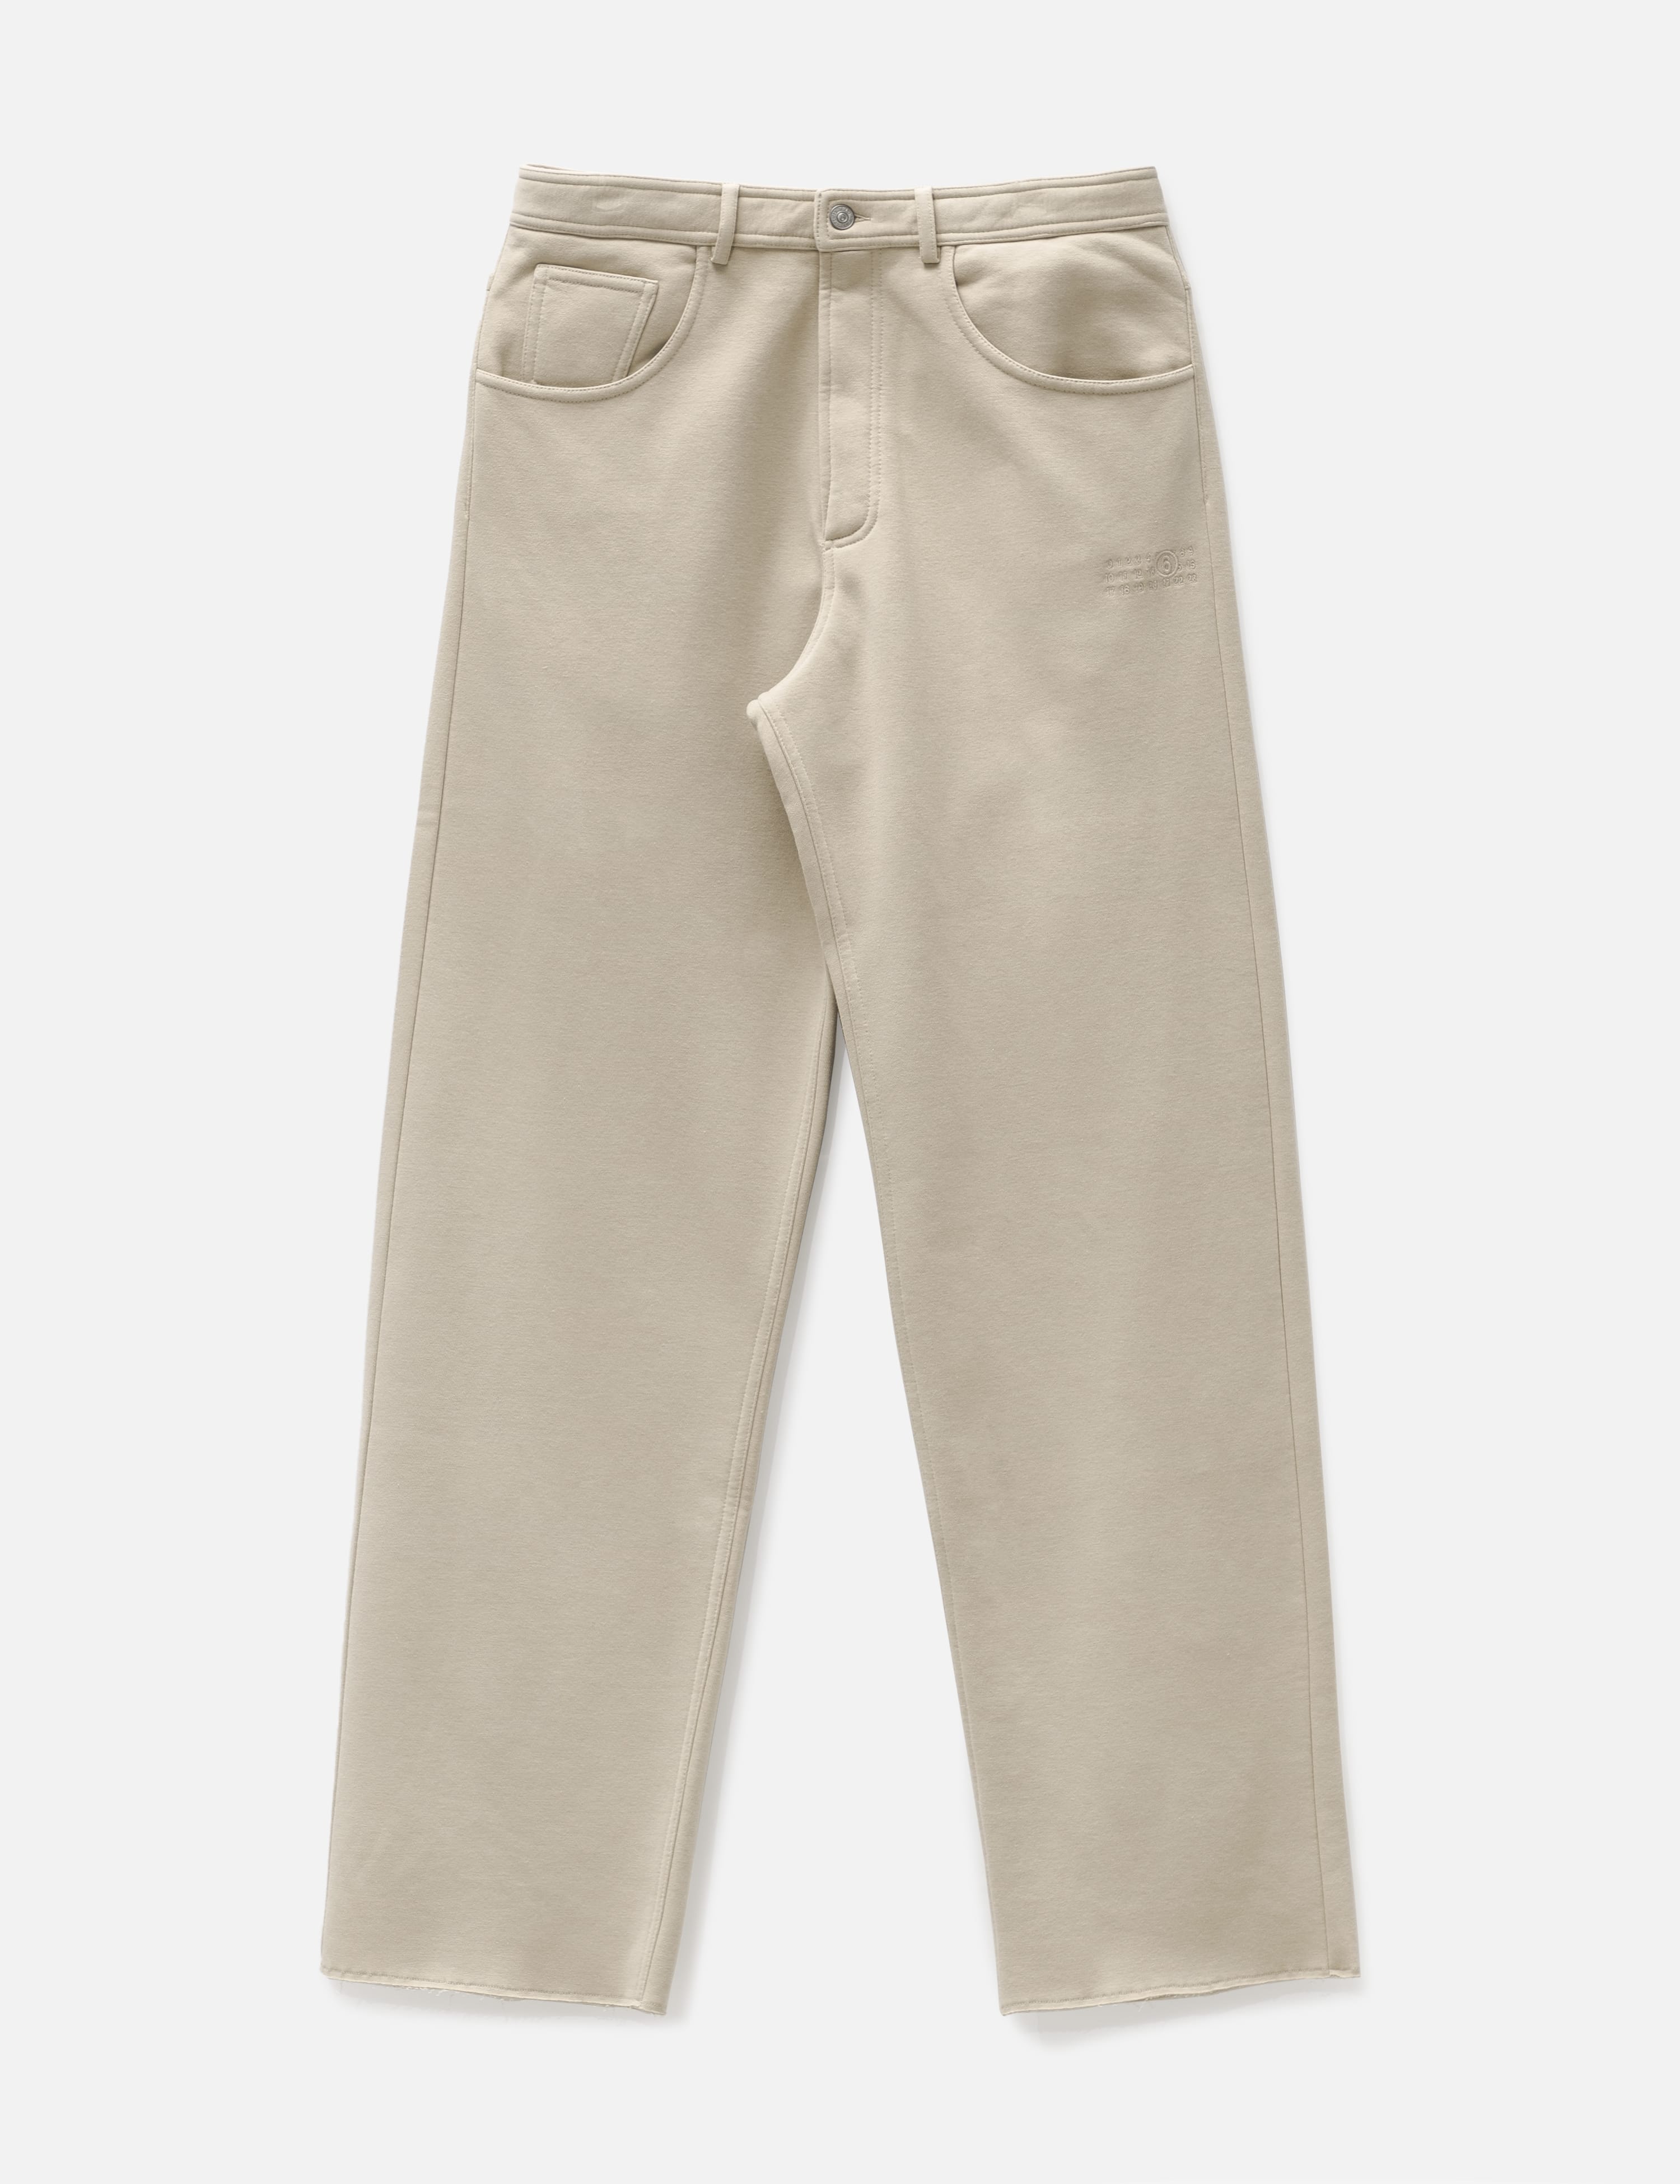 Pants In Sale | HBX - Globally Curated Fashion and Lifestyle by 